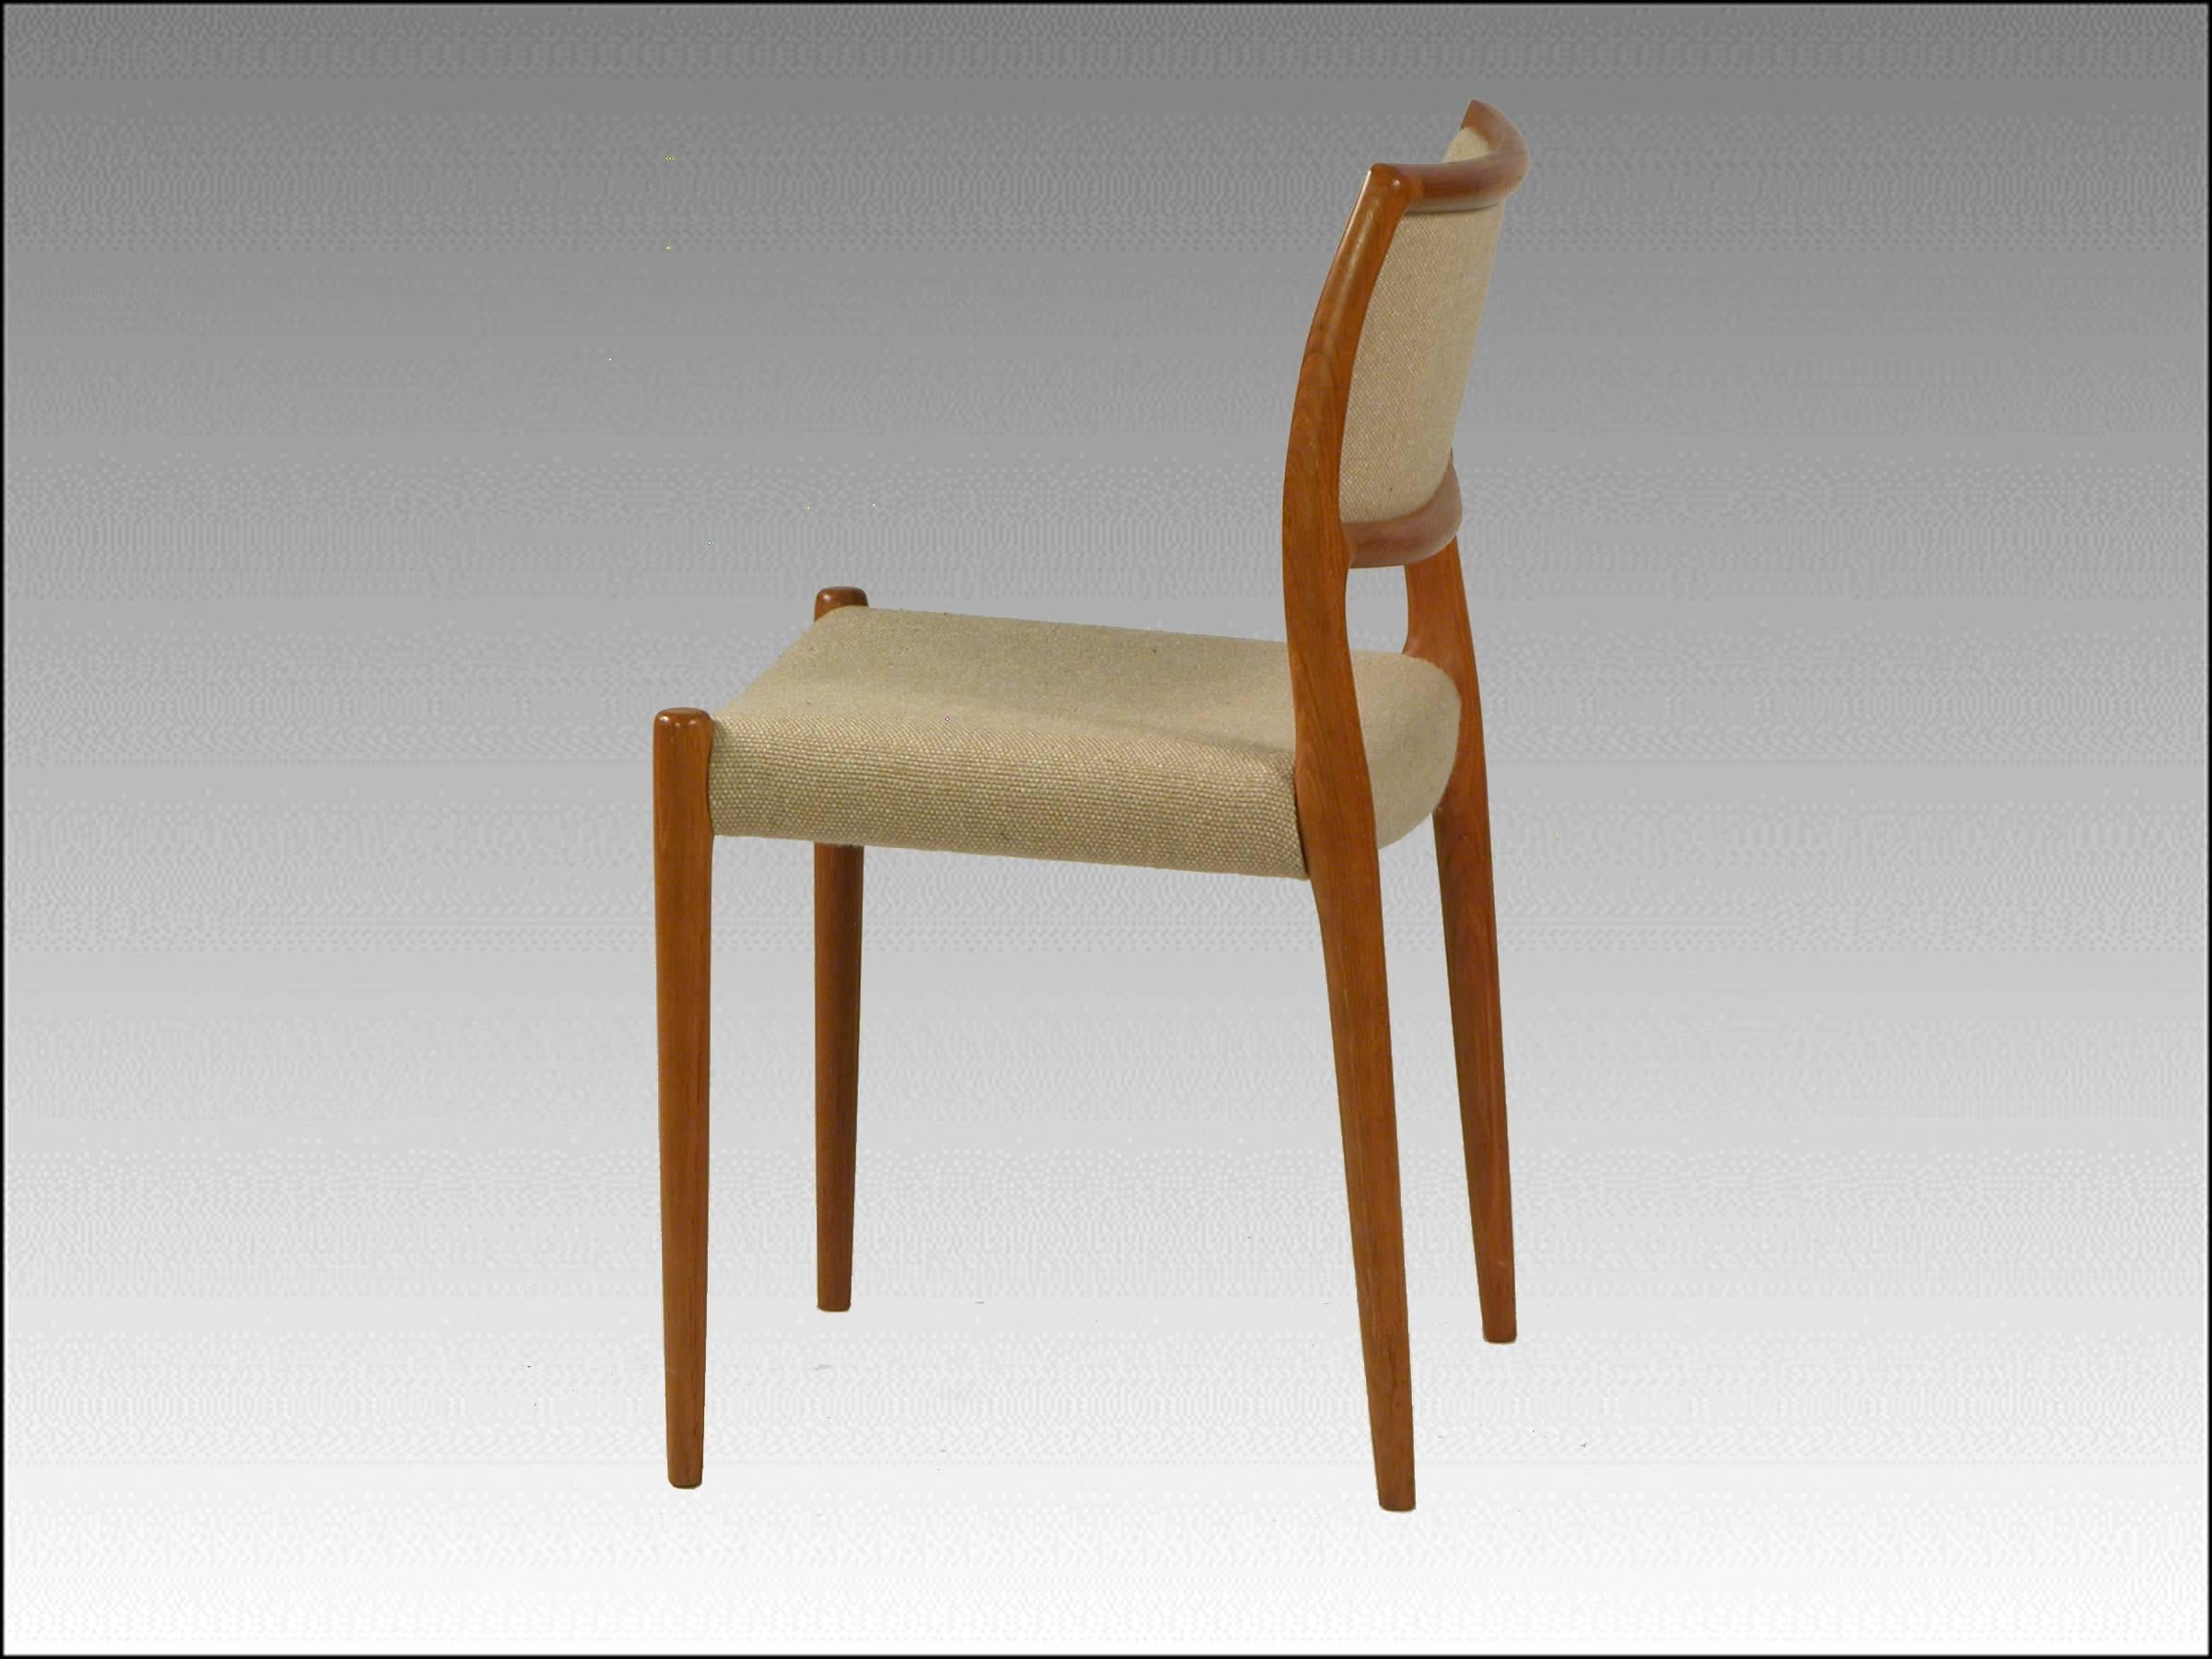 The model 80 dining chair was designed by Niels Otto Møller for JL. Møllers in the 1960s

The comfortable chairs are in good vintage condition

If you wish to have the chairs reupholstered we are happy to make an offer and reupholster them with